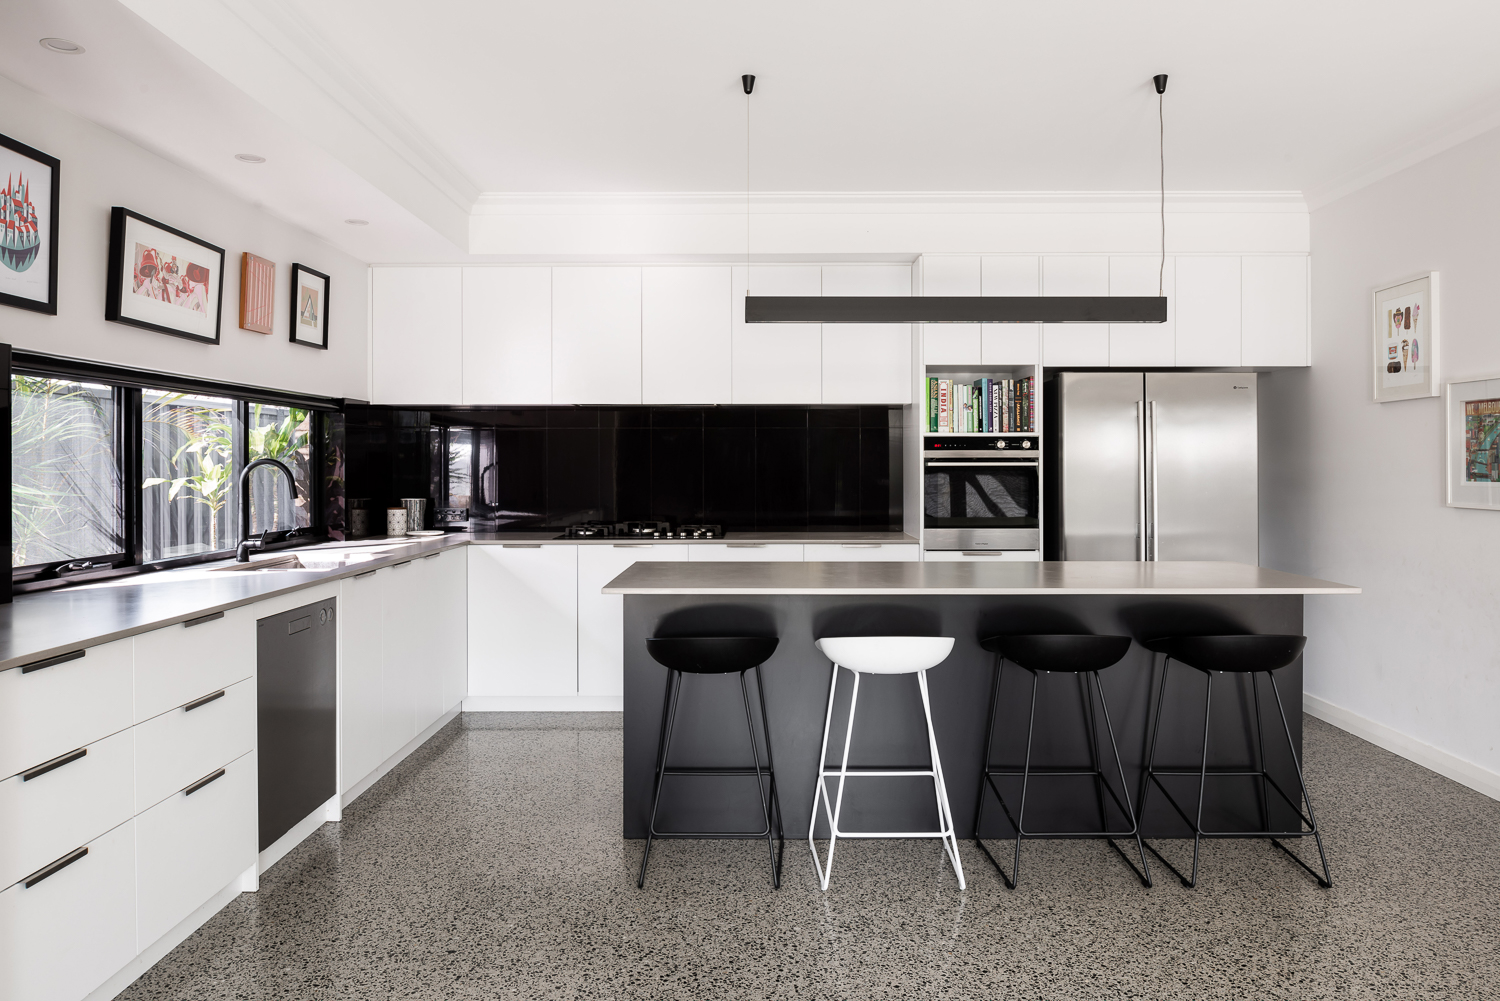 Monochrome kitchen of the James Street Residence, by Romona Sandon Designs. Image by Dion Robeson.